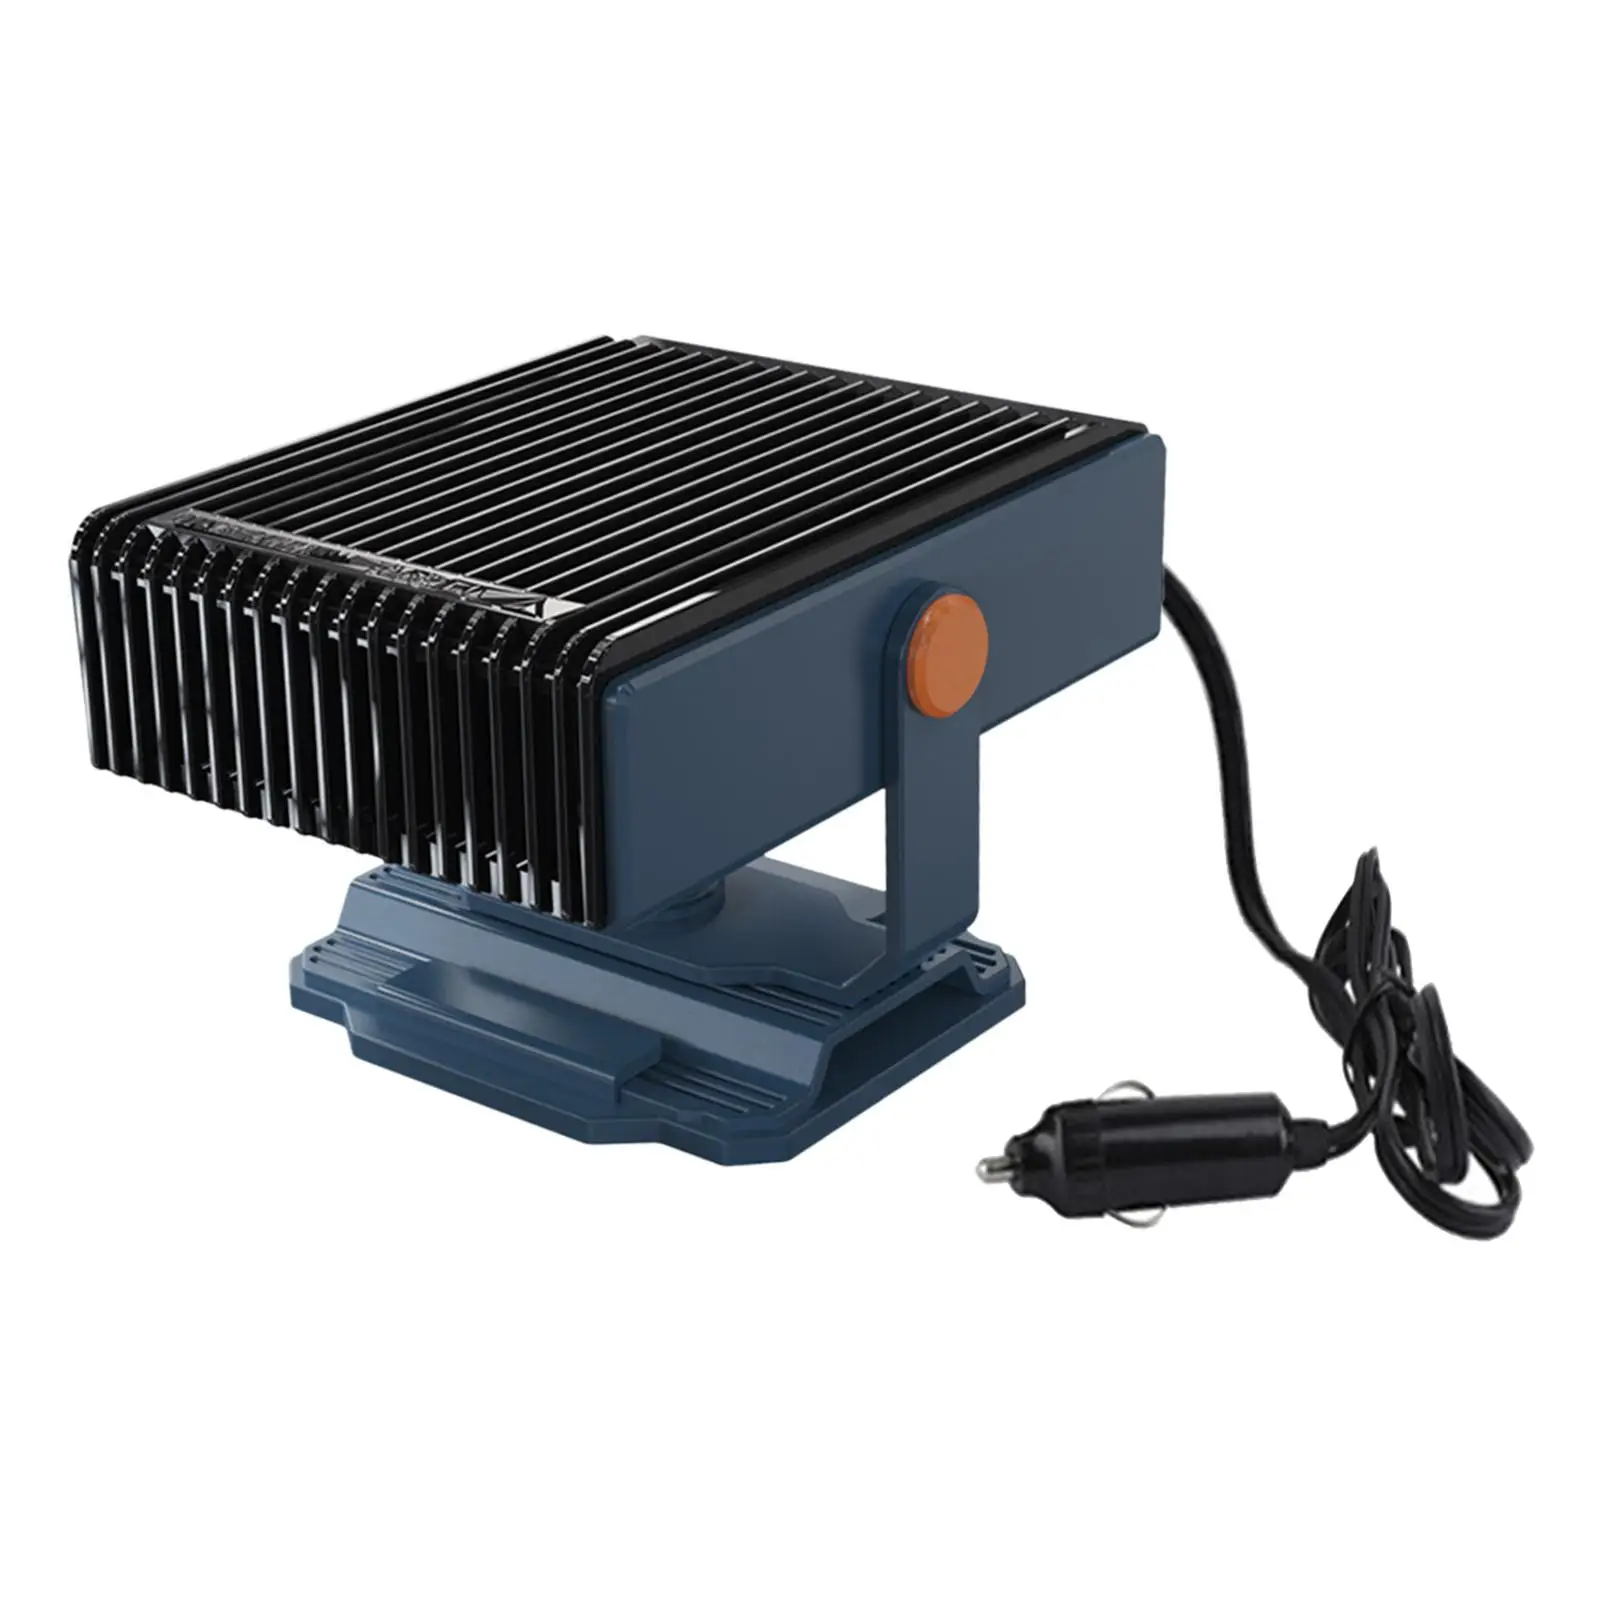 Car Heater Quick Heating Protable Defrost Defogger 12V 150W Multifunction Auto Heater Fan for Car RV Vehicles Boat Truck